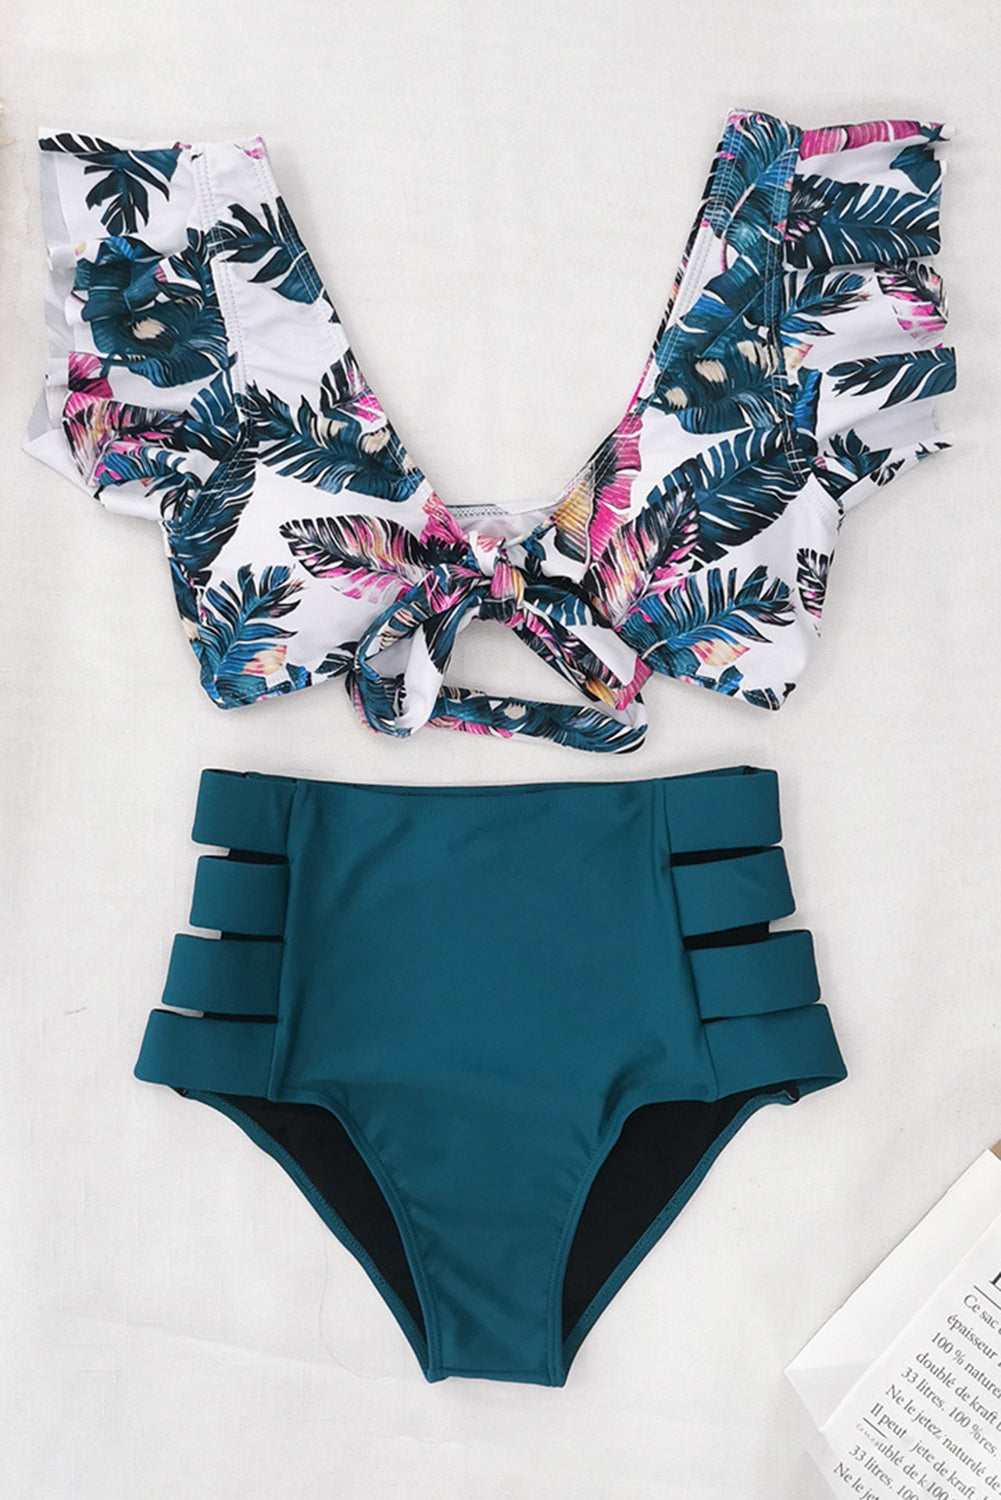 Floral Print Front Tie High Waist Bikini Swimsuit with Ruffles